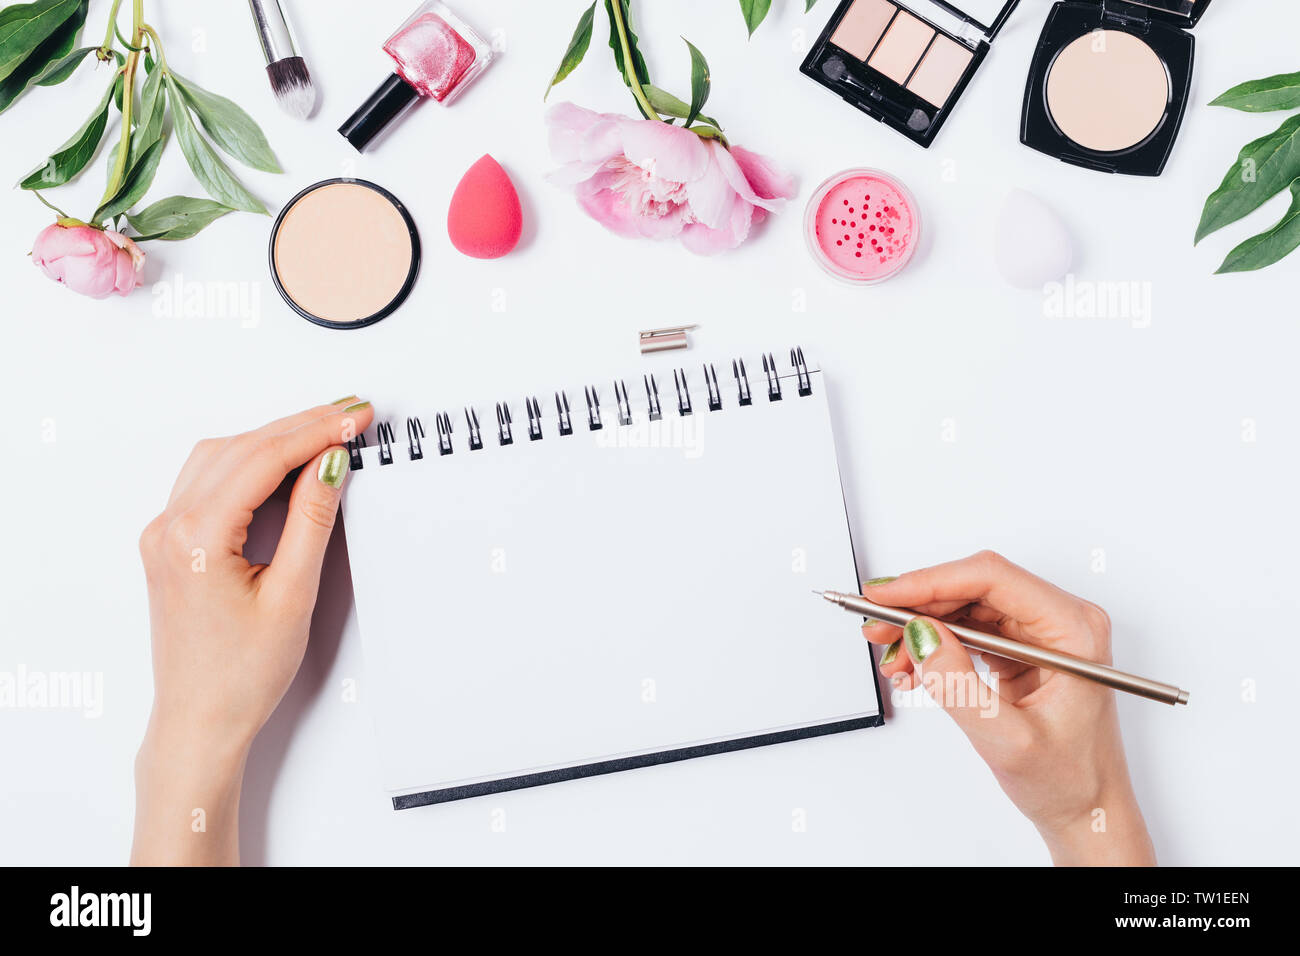 Woman's hands write in blank notepad template next to makeup products and fresh pink flowers peonies on white background, flat lay. Stock Photo